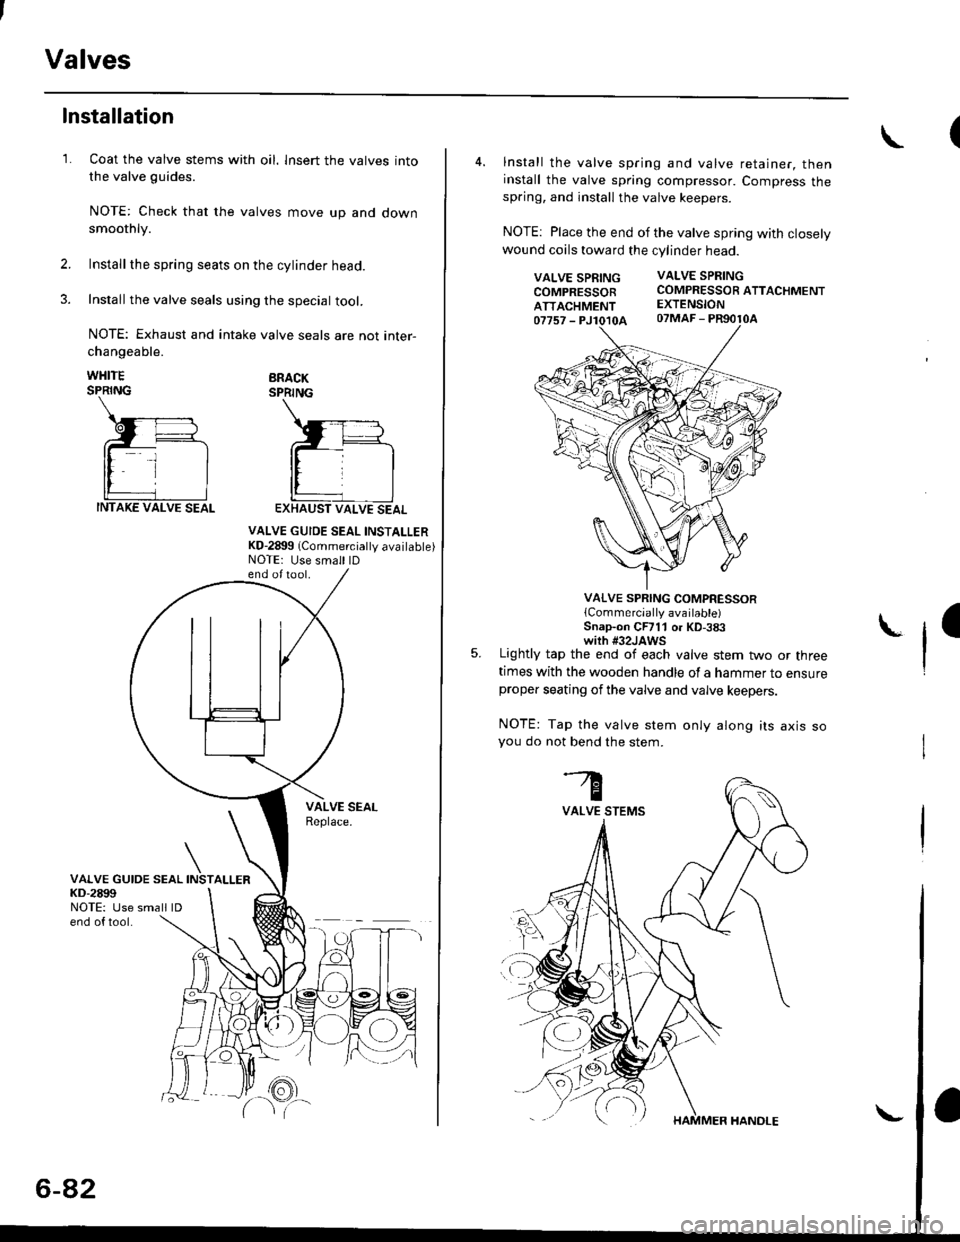 HONDA CIVIC 1998 6.G Workshop Manual Valves
1.
Installation
Coat the valve stems with oil. lnsert the valves into
the valve guides.
NOTE: Check that the valves move up and downsmoothly.
Installthe spring seats on the cylinder head.
Insta